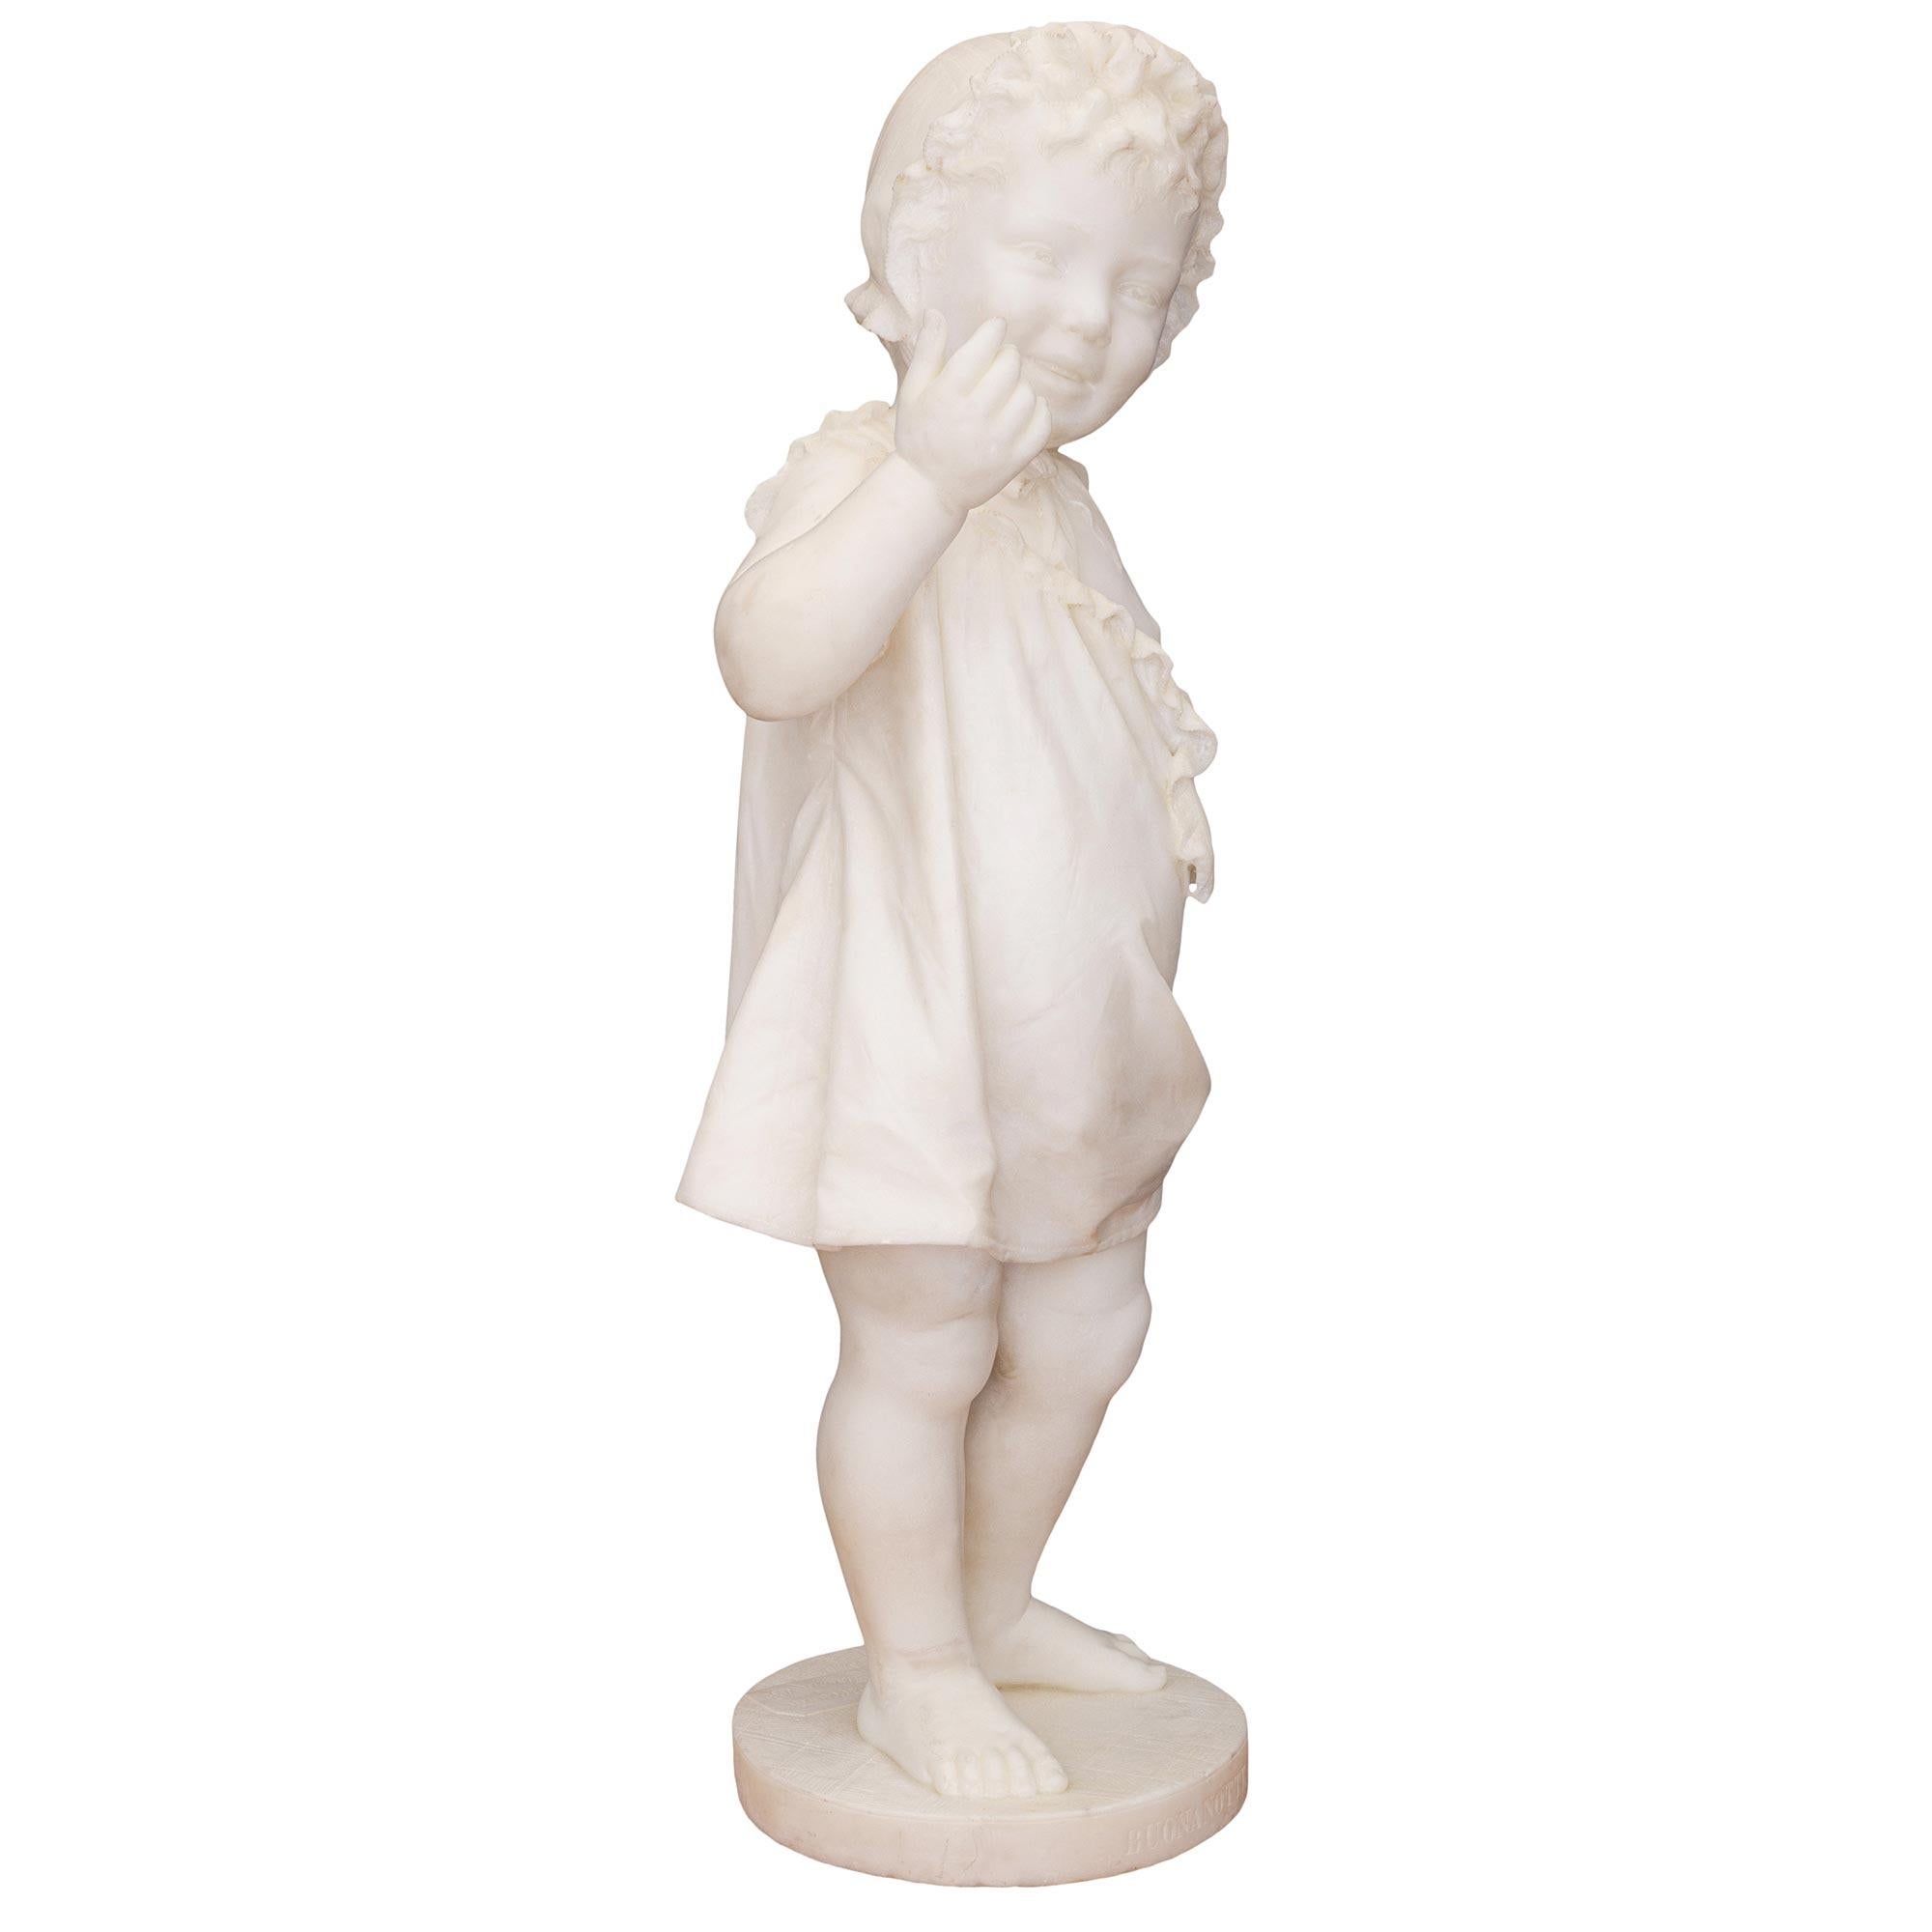 A most charming and wonderfully executed Italian 19th century white Carrara marble statue of a young girl, titled BUONANOTTE. The statue is raised by a circular base with a fine paver like design and the inscription BUONANOTTE at the front meaning